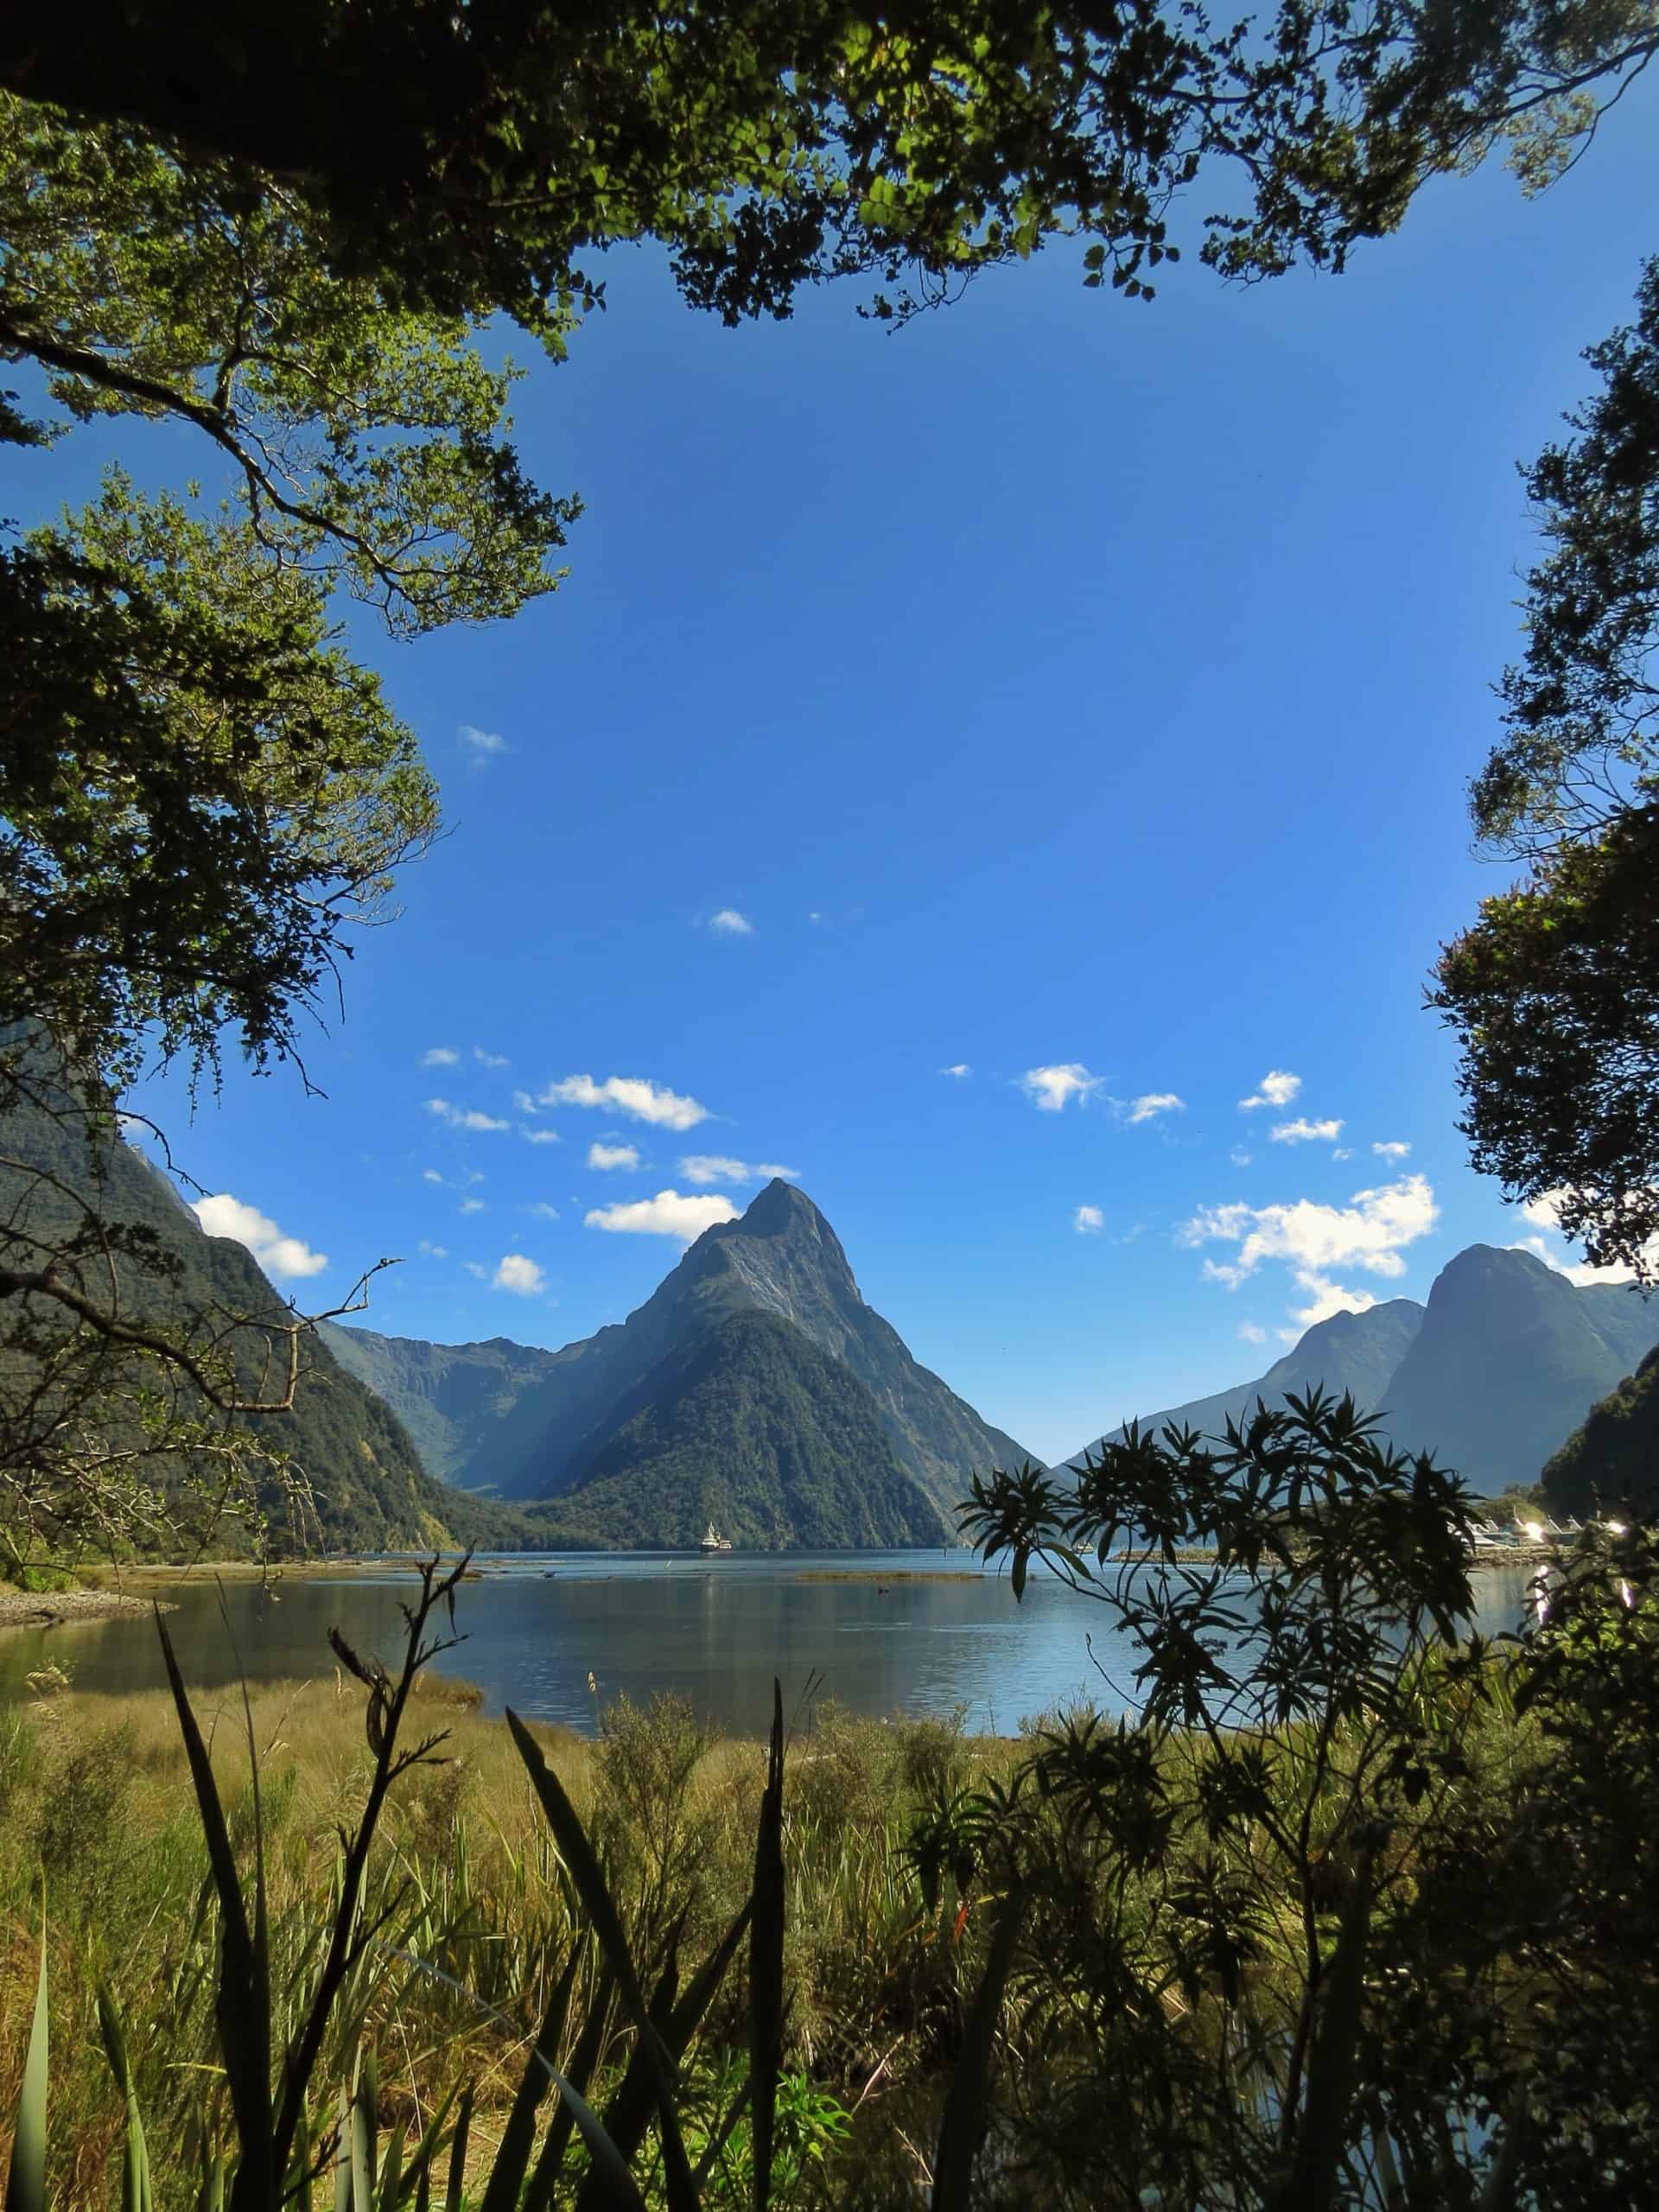 Milford Sound is the most famous part of Fiordland National Park